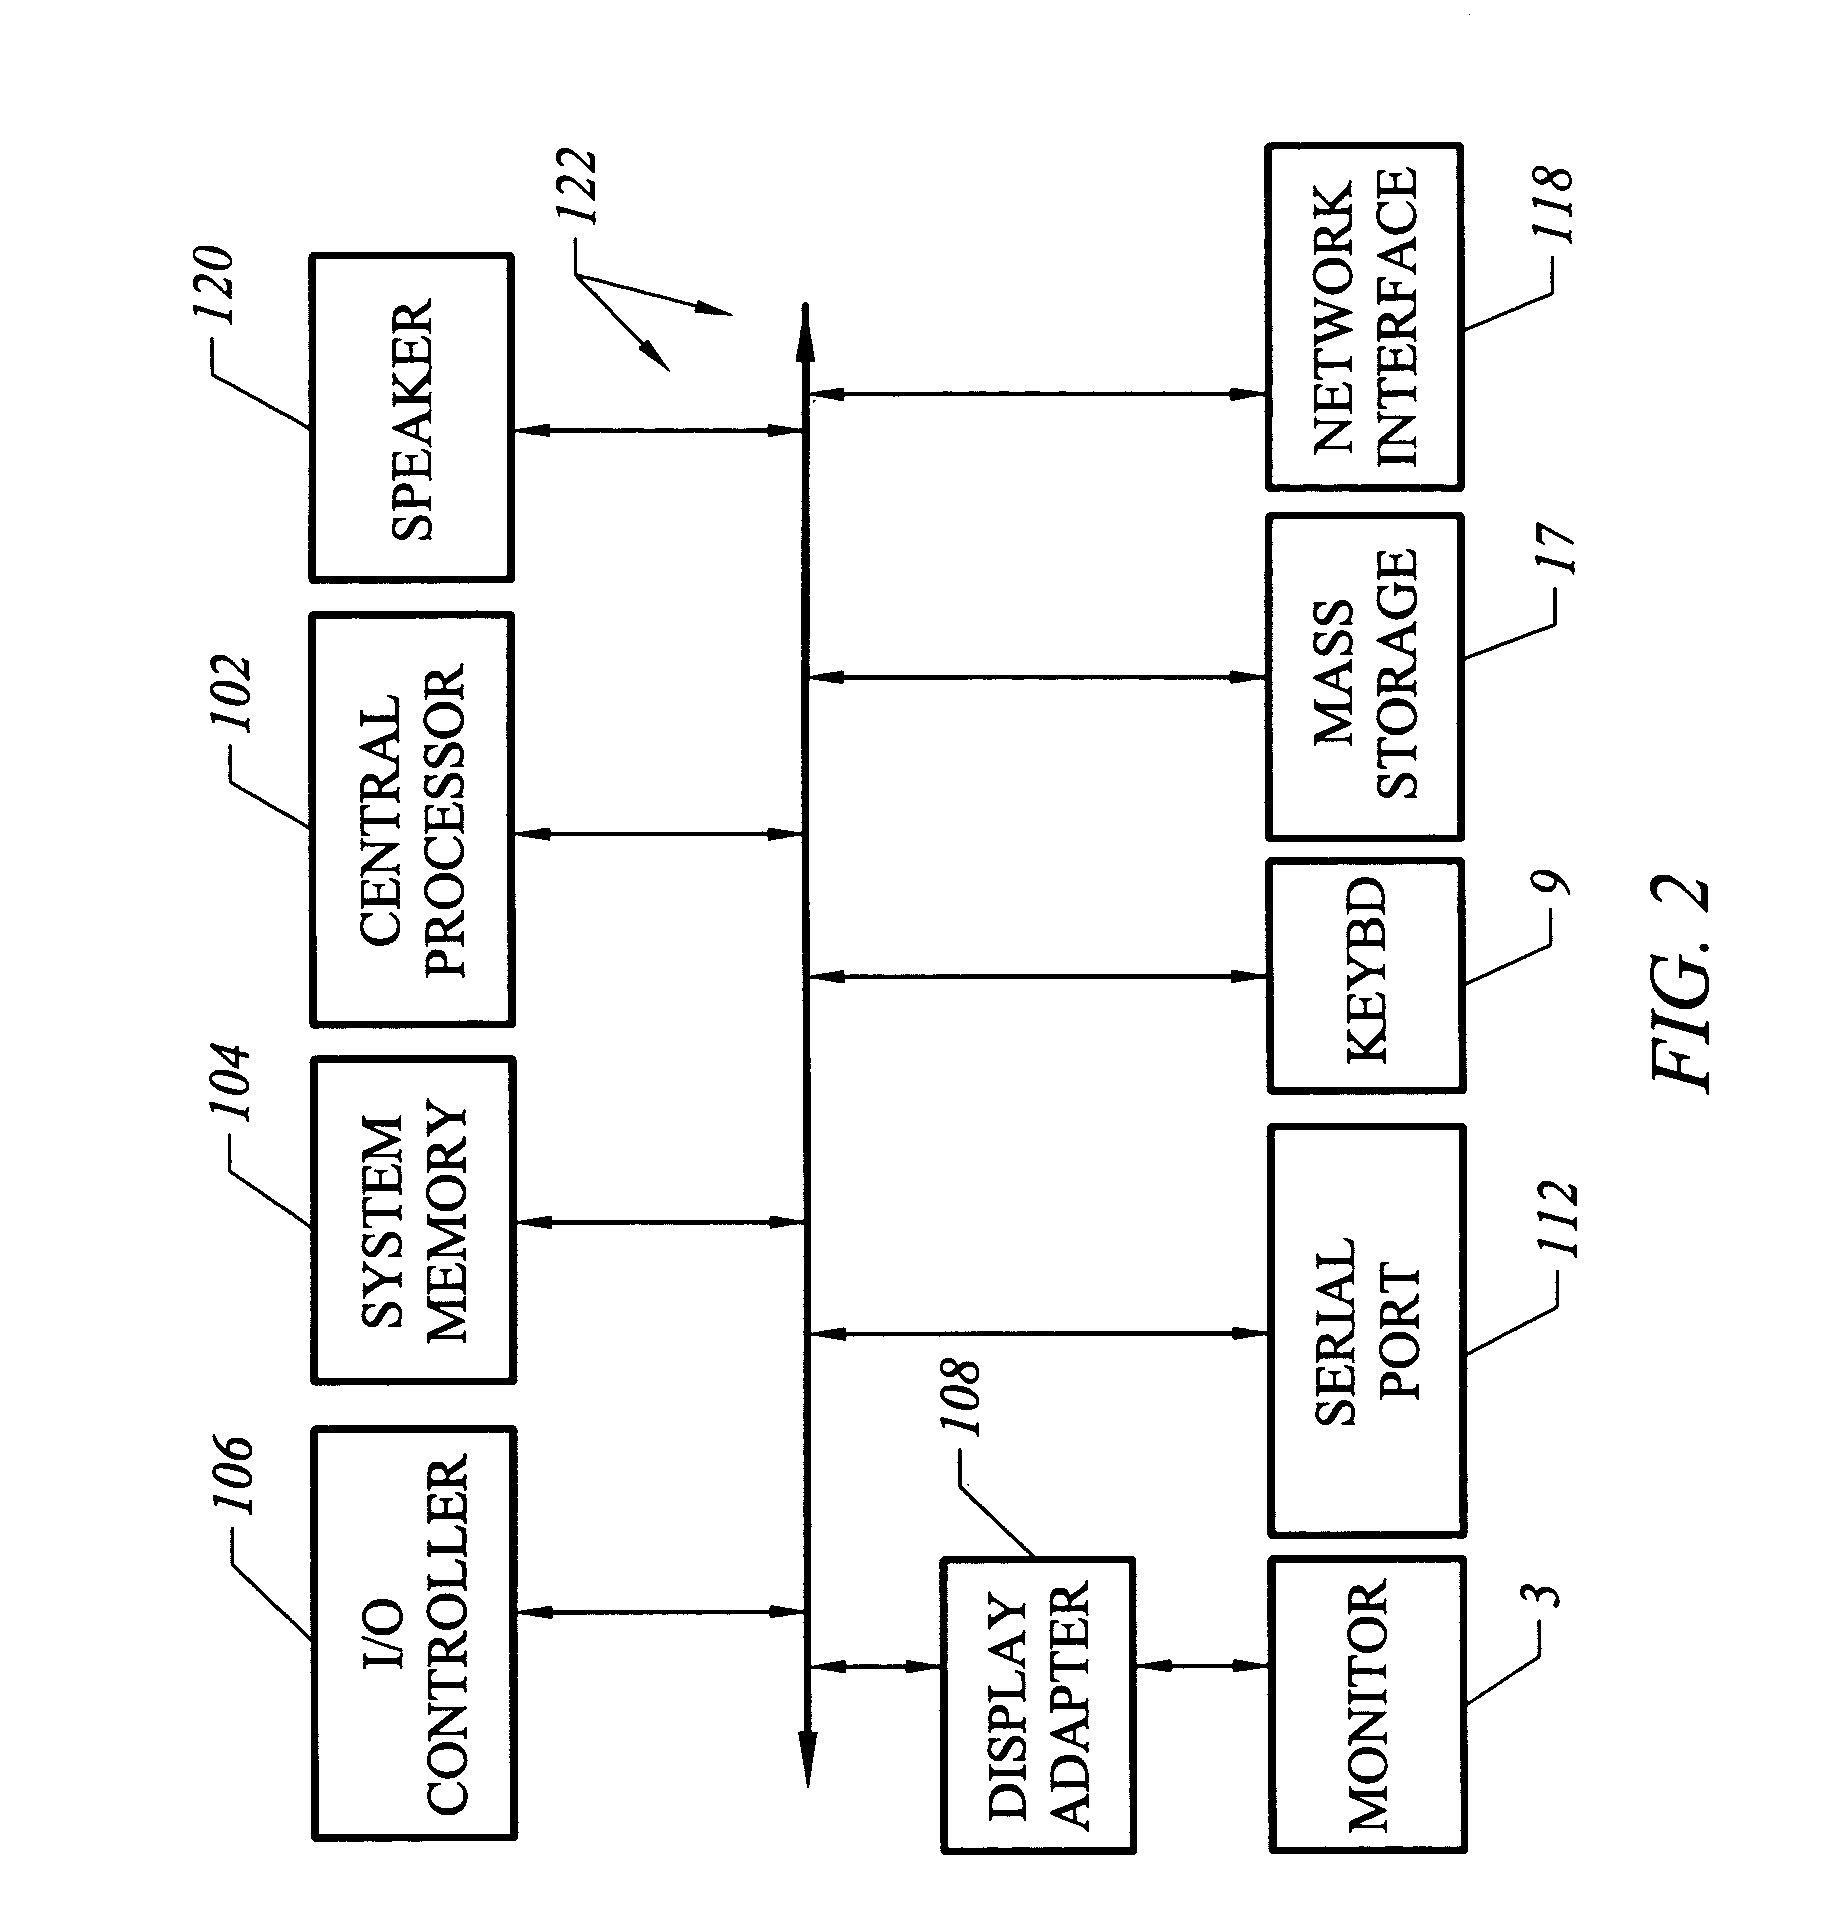 Method of estimating performance of integrated circuit designs using state point identification